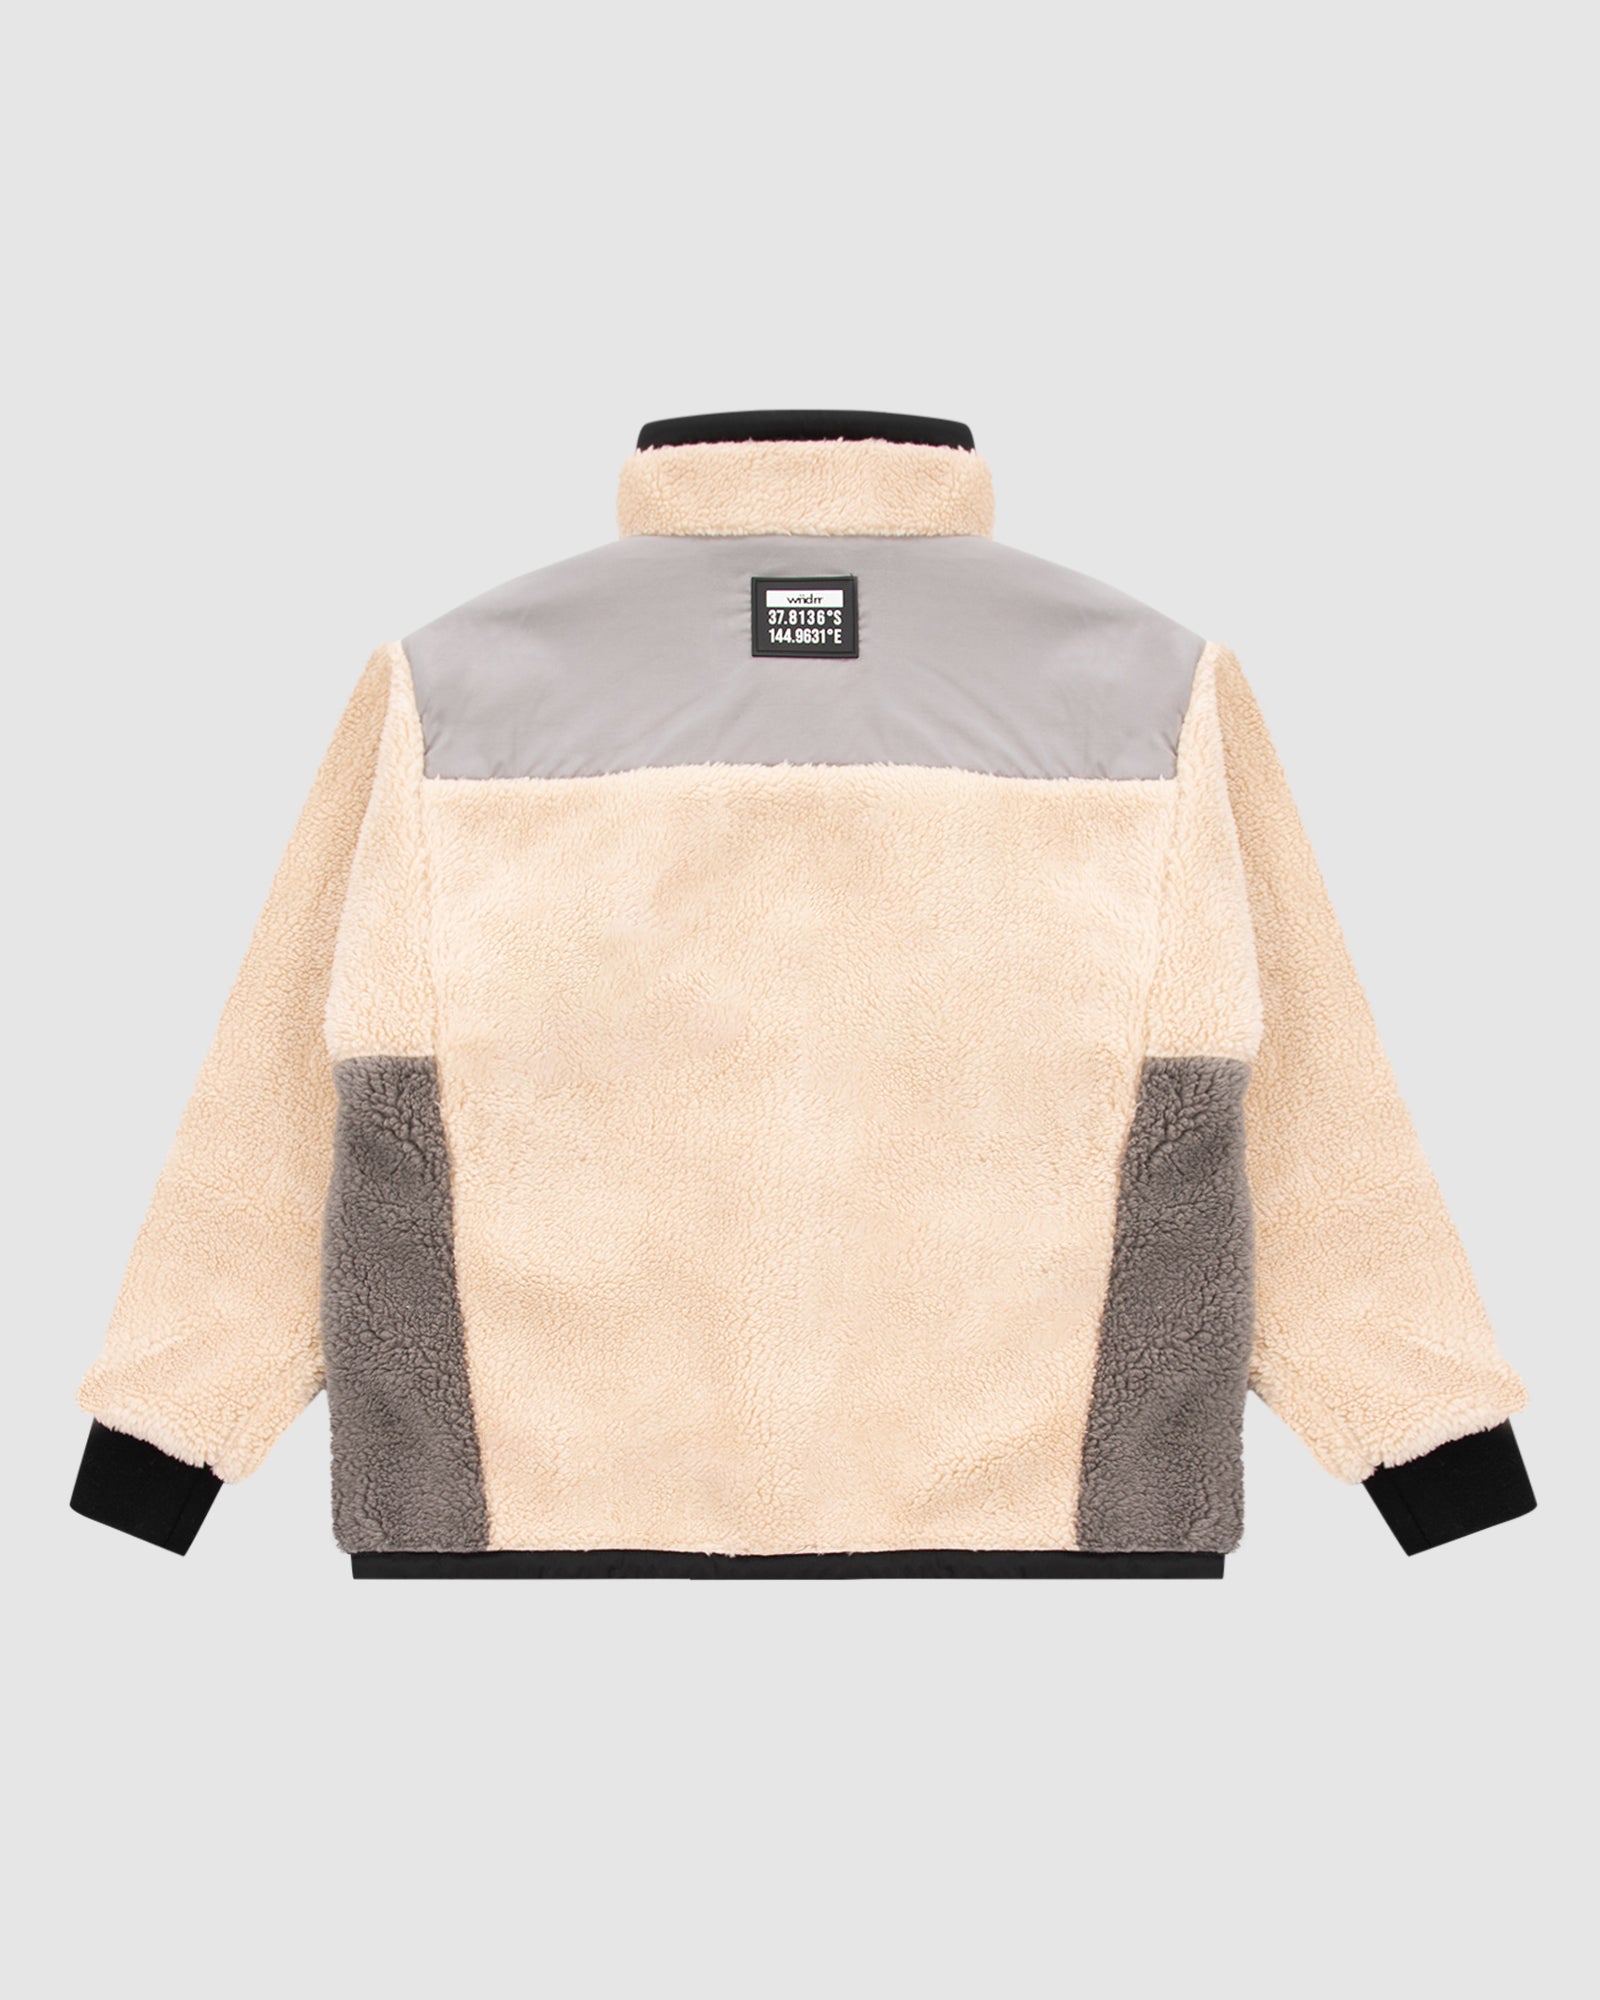 COUNT IT SHERPA JACKET - GREY/OFF WHITE